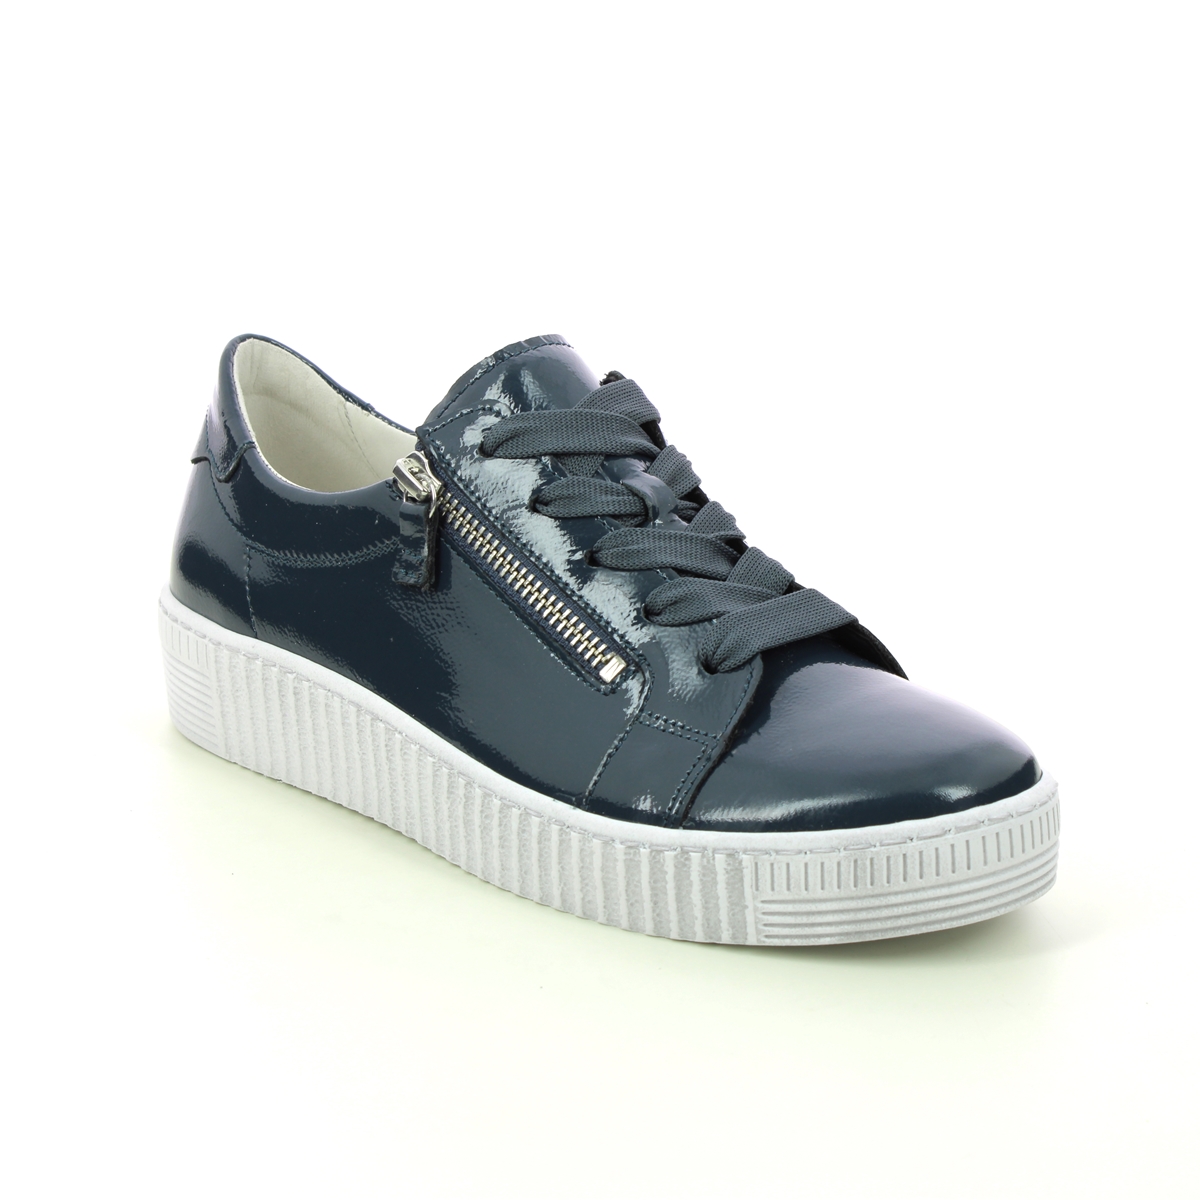 Gabor Wisdom Petrol blue patent Womens trainers 33.334.99 in a Plain Leather in Size 6